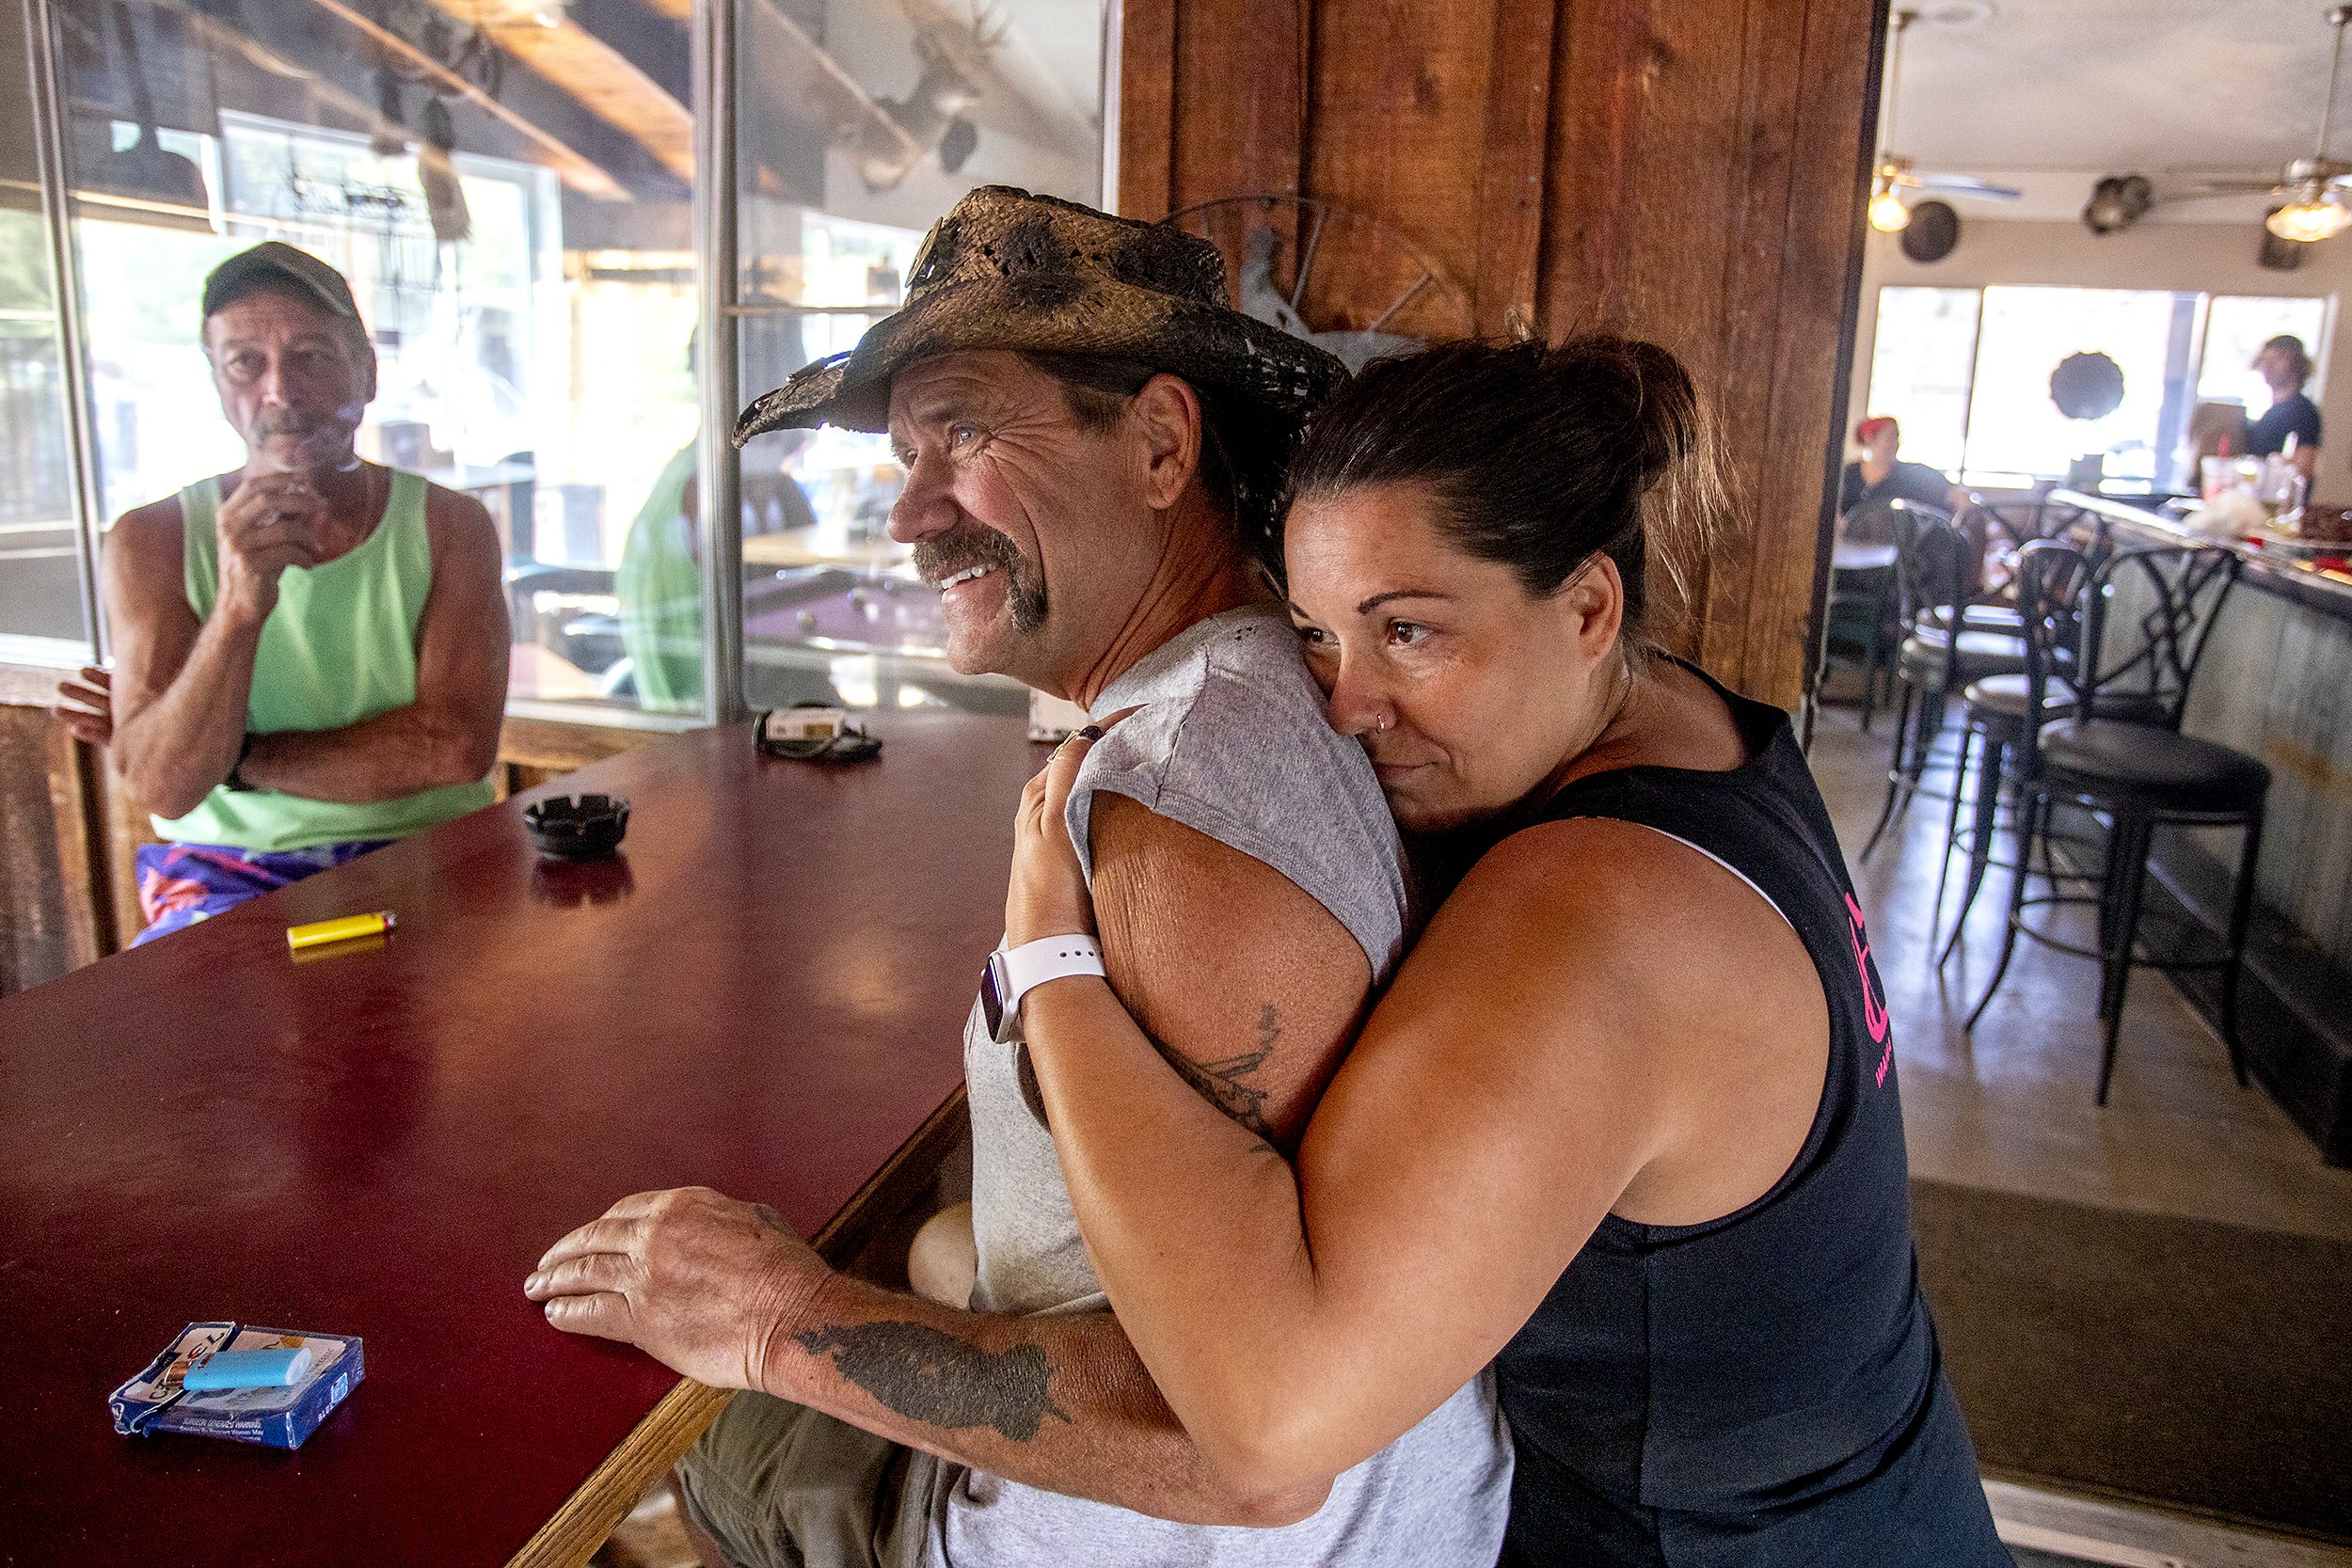  Sharon Barber embraces her father Cory James as they prepare food and gather up donations of food and water at the Waha Bar and Grill on Saturday. James, who owns the Waha Bar and Grill, was forced to evacuate his home on Friday night as firefighter